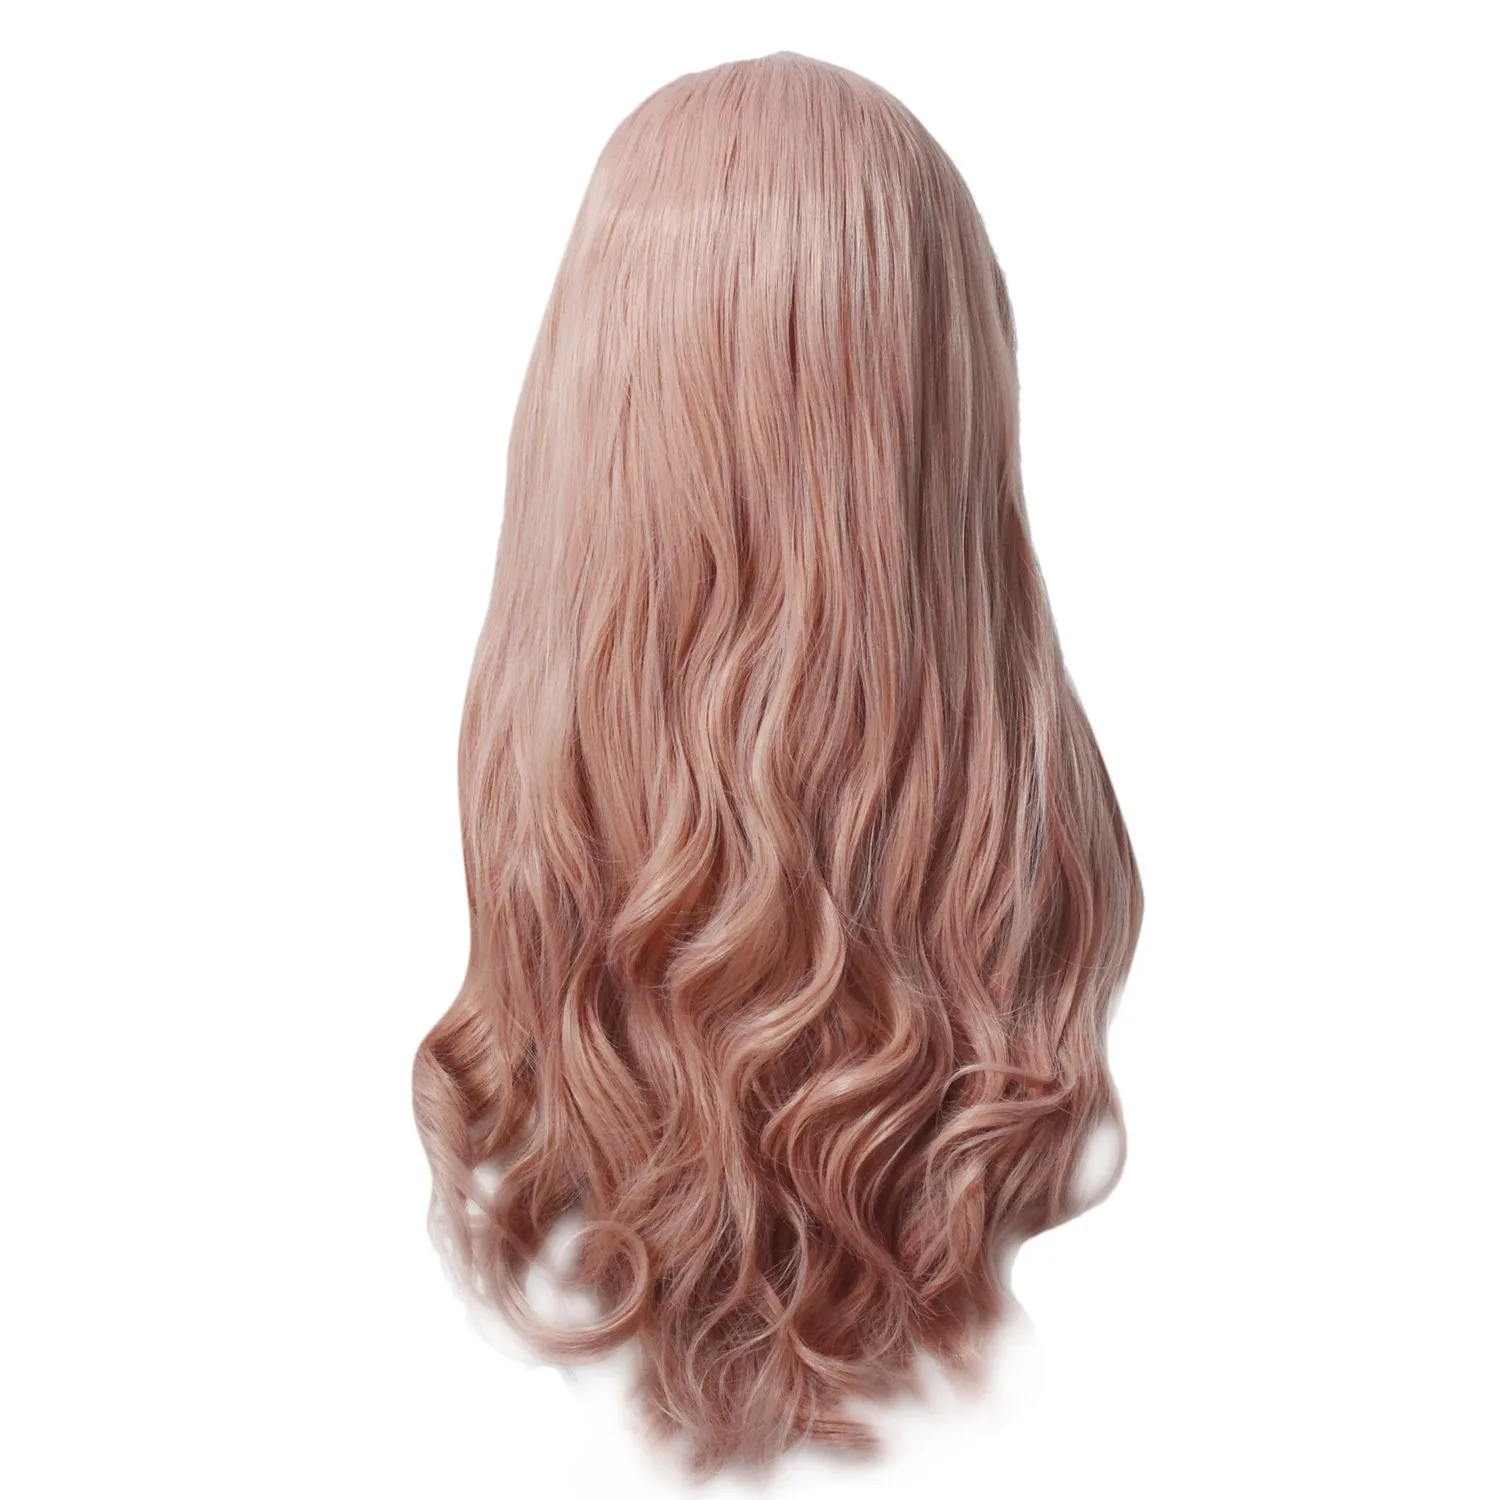 

Lace Front Wig with Pink Long Curly Hair,24 Inch Fluffy Large Wavy Chemical Fiber Hair